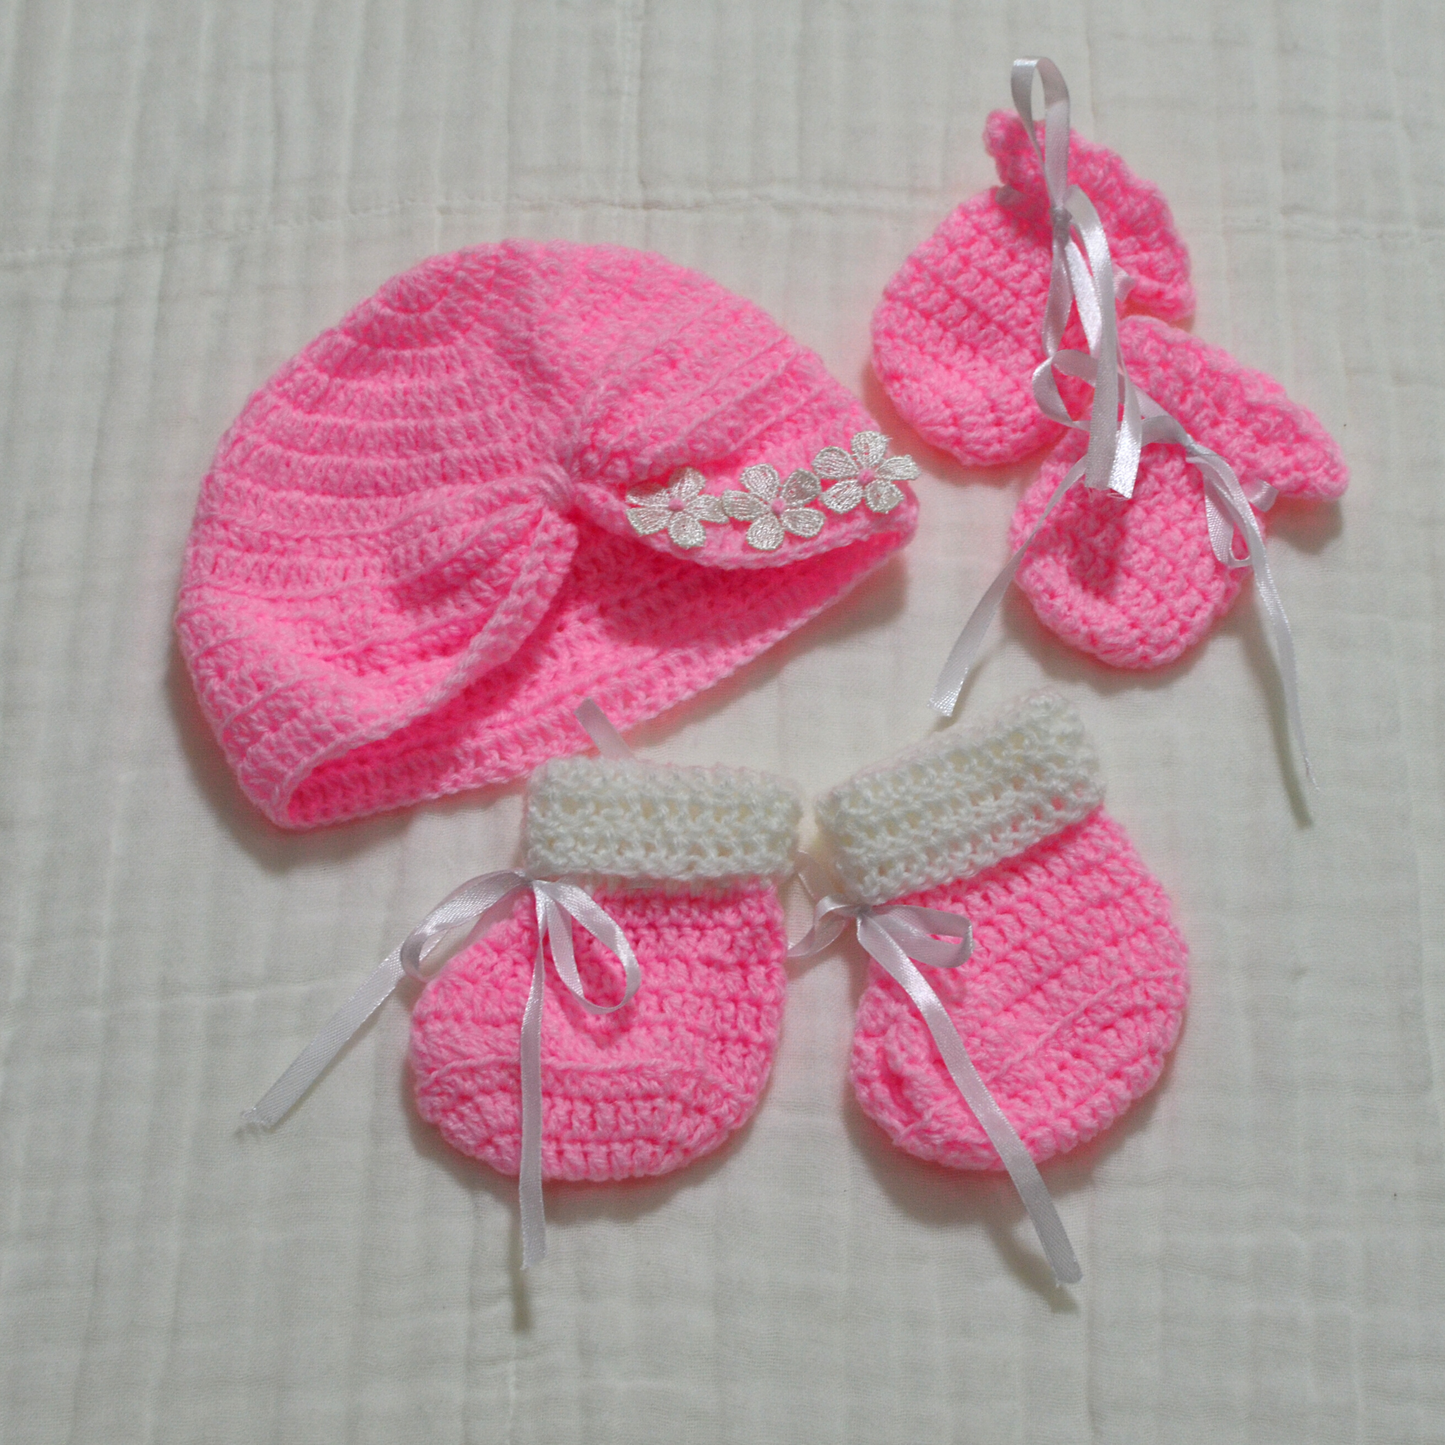 Crochet / Knitted Baby Hat, Socks, Mittens Set 0 to 3 months